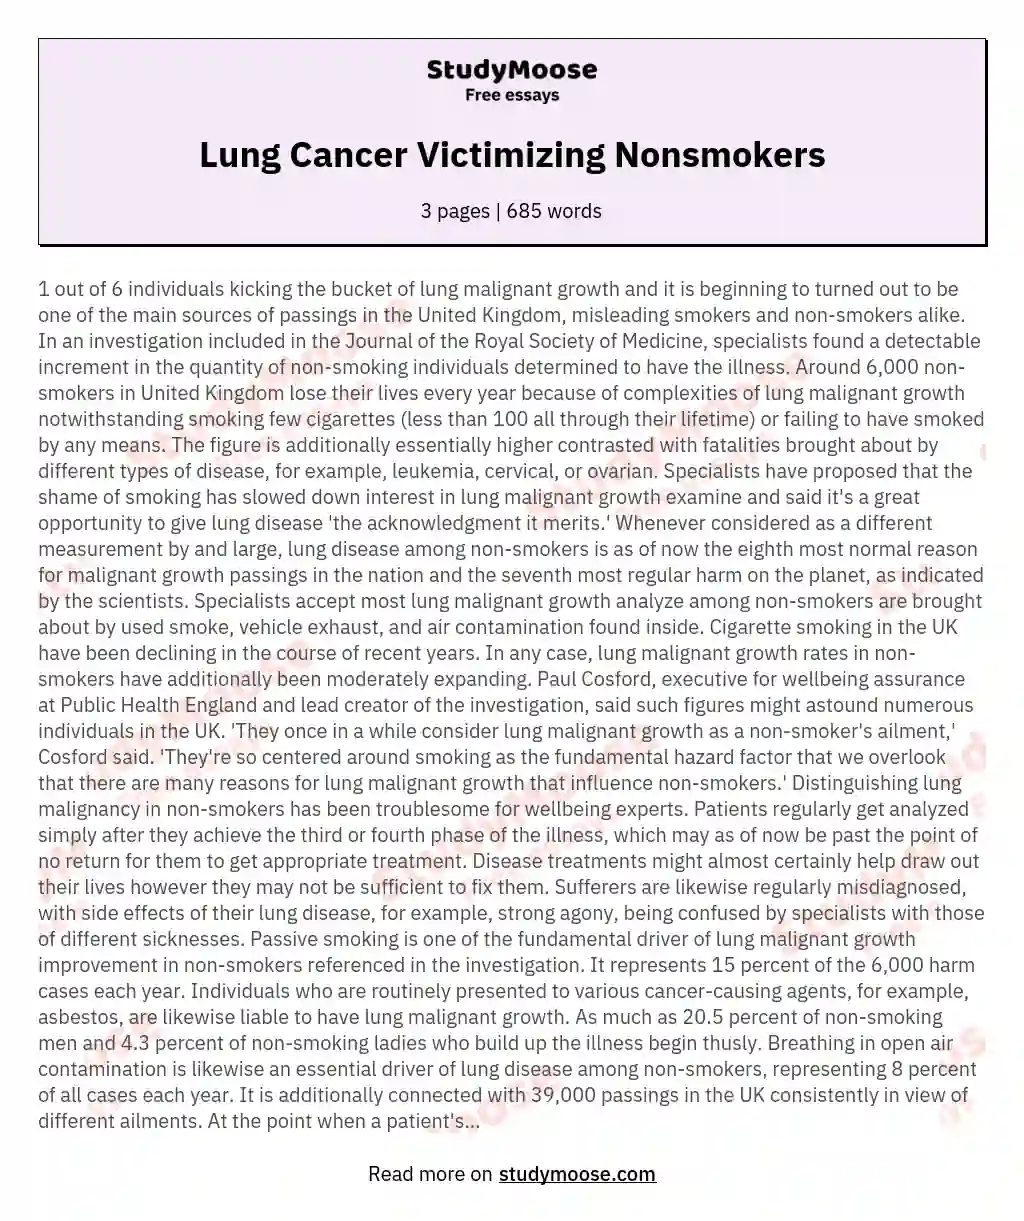 Lung Cancer Victimizing Nonsmokers essay